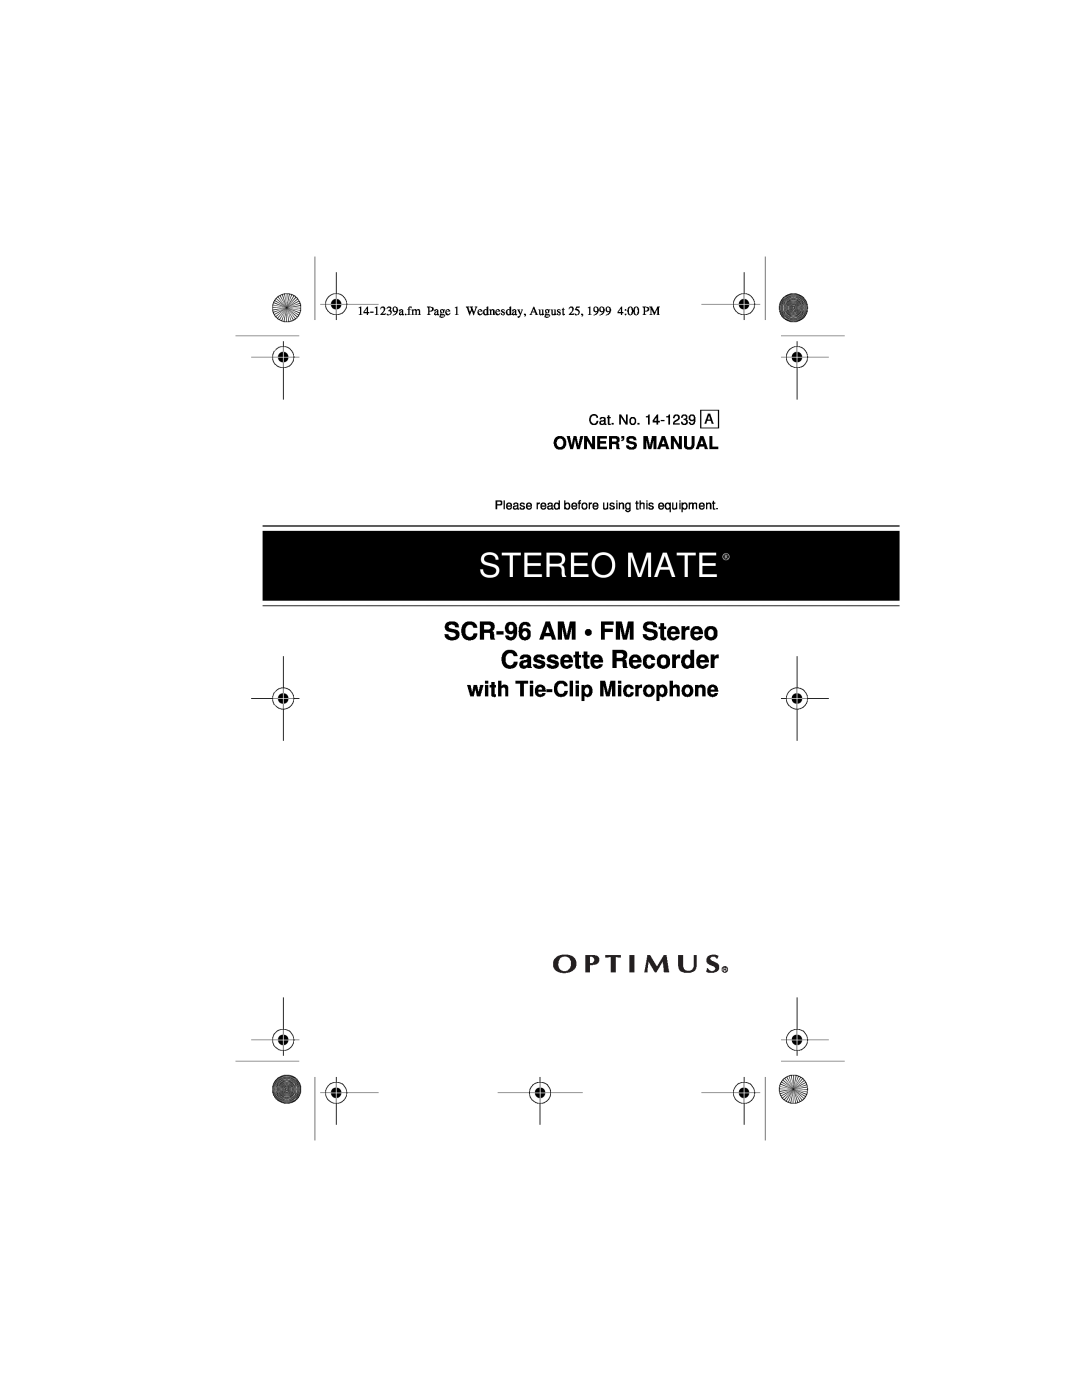 Optimus owner manual Stereo Mate, SCR-96AM FM Stereo Cassette Recorder, with Tie-ClipMicrophone 